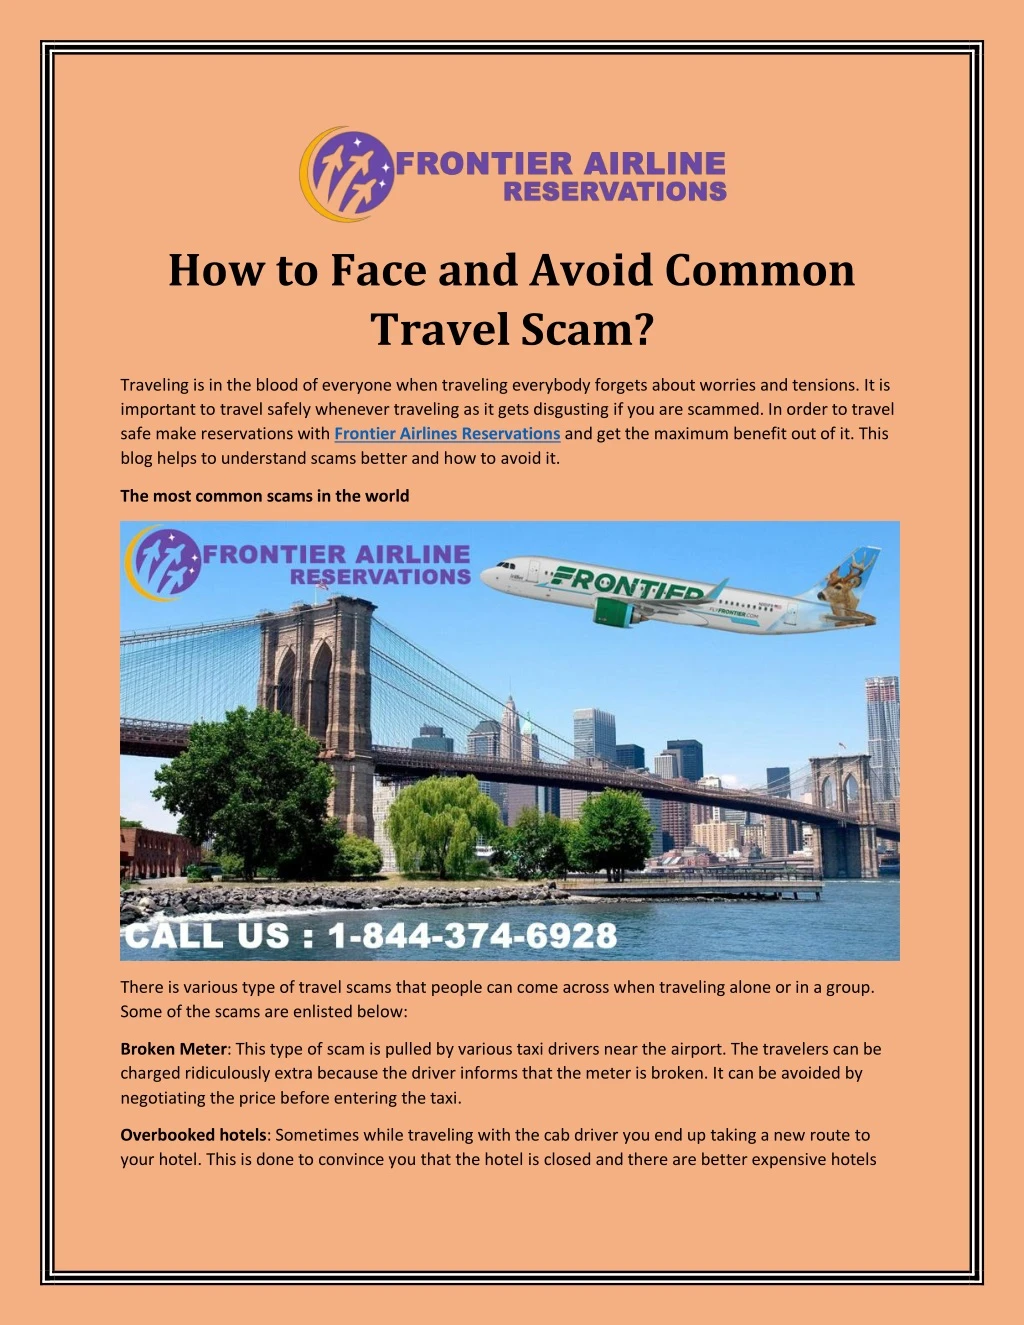 how to face and avoid common travel scam